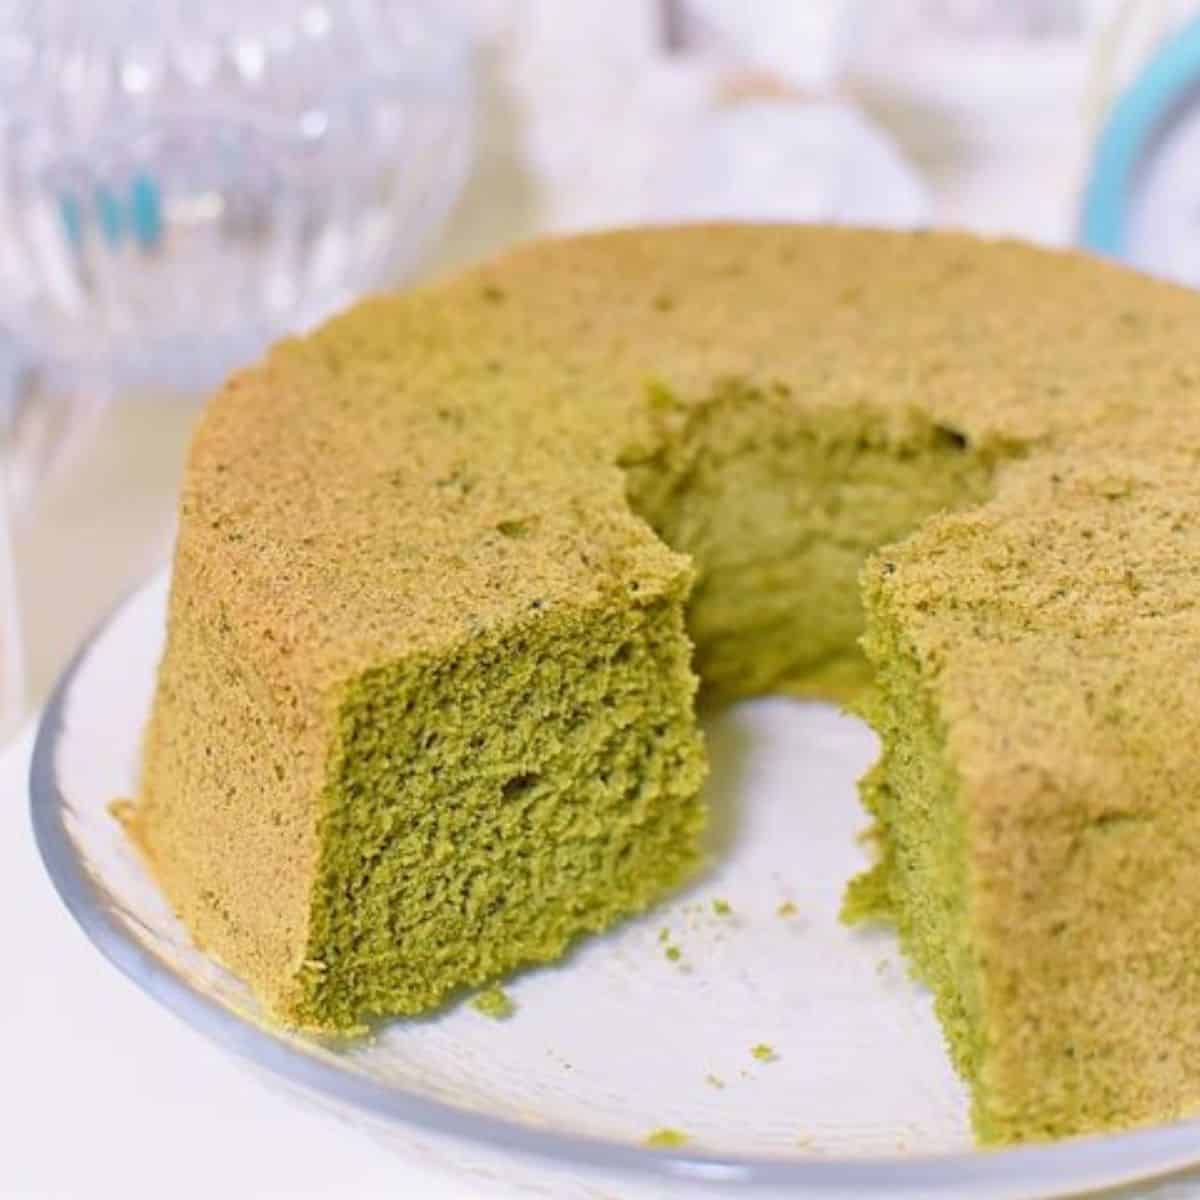 Matcha sponge cake with donut hole in the middle